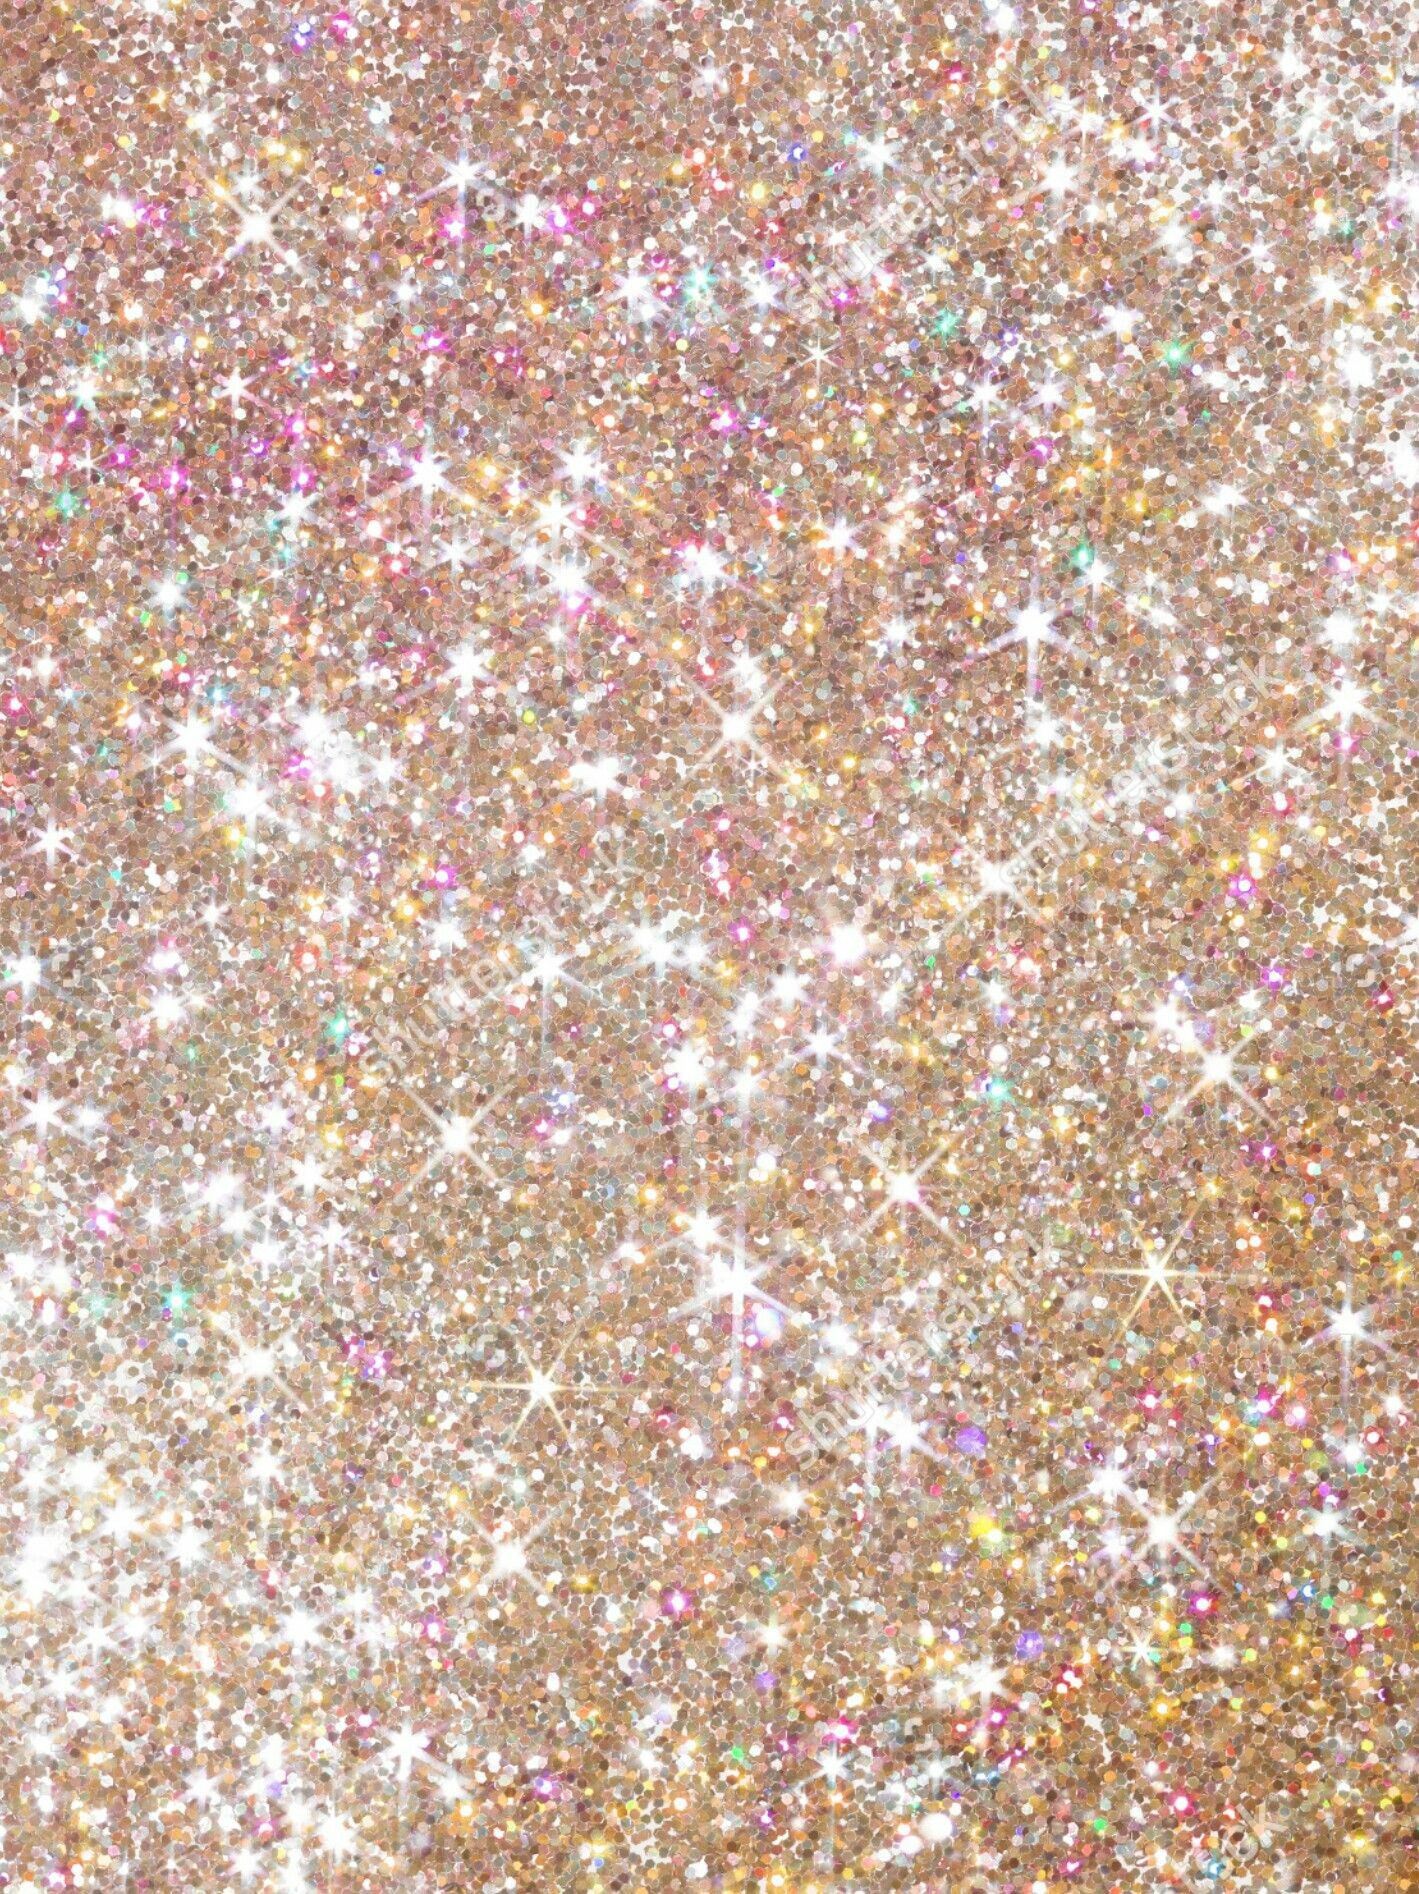 45+ Glitter iPhone 6 Plus Wallpapers: HD, 4K, 5K for PC and Mobile |  Download free images for iPhone, Android